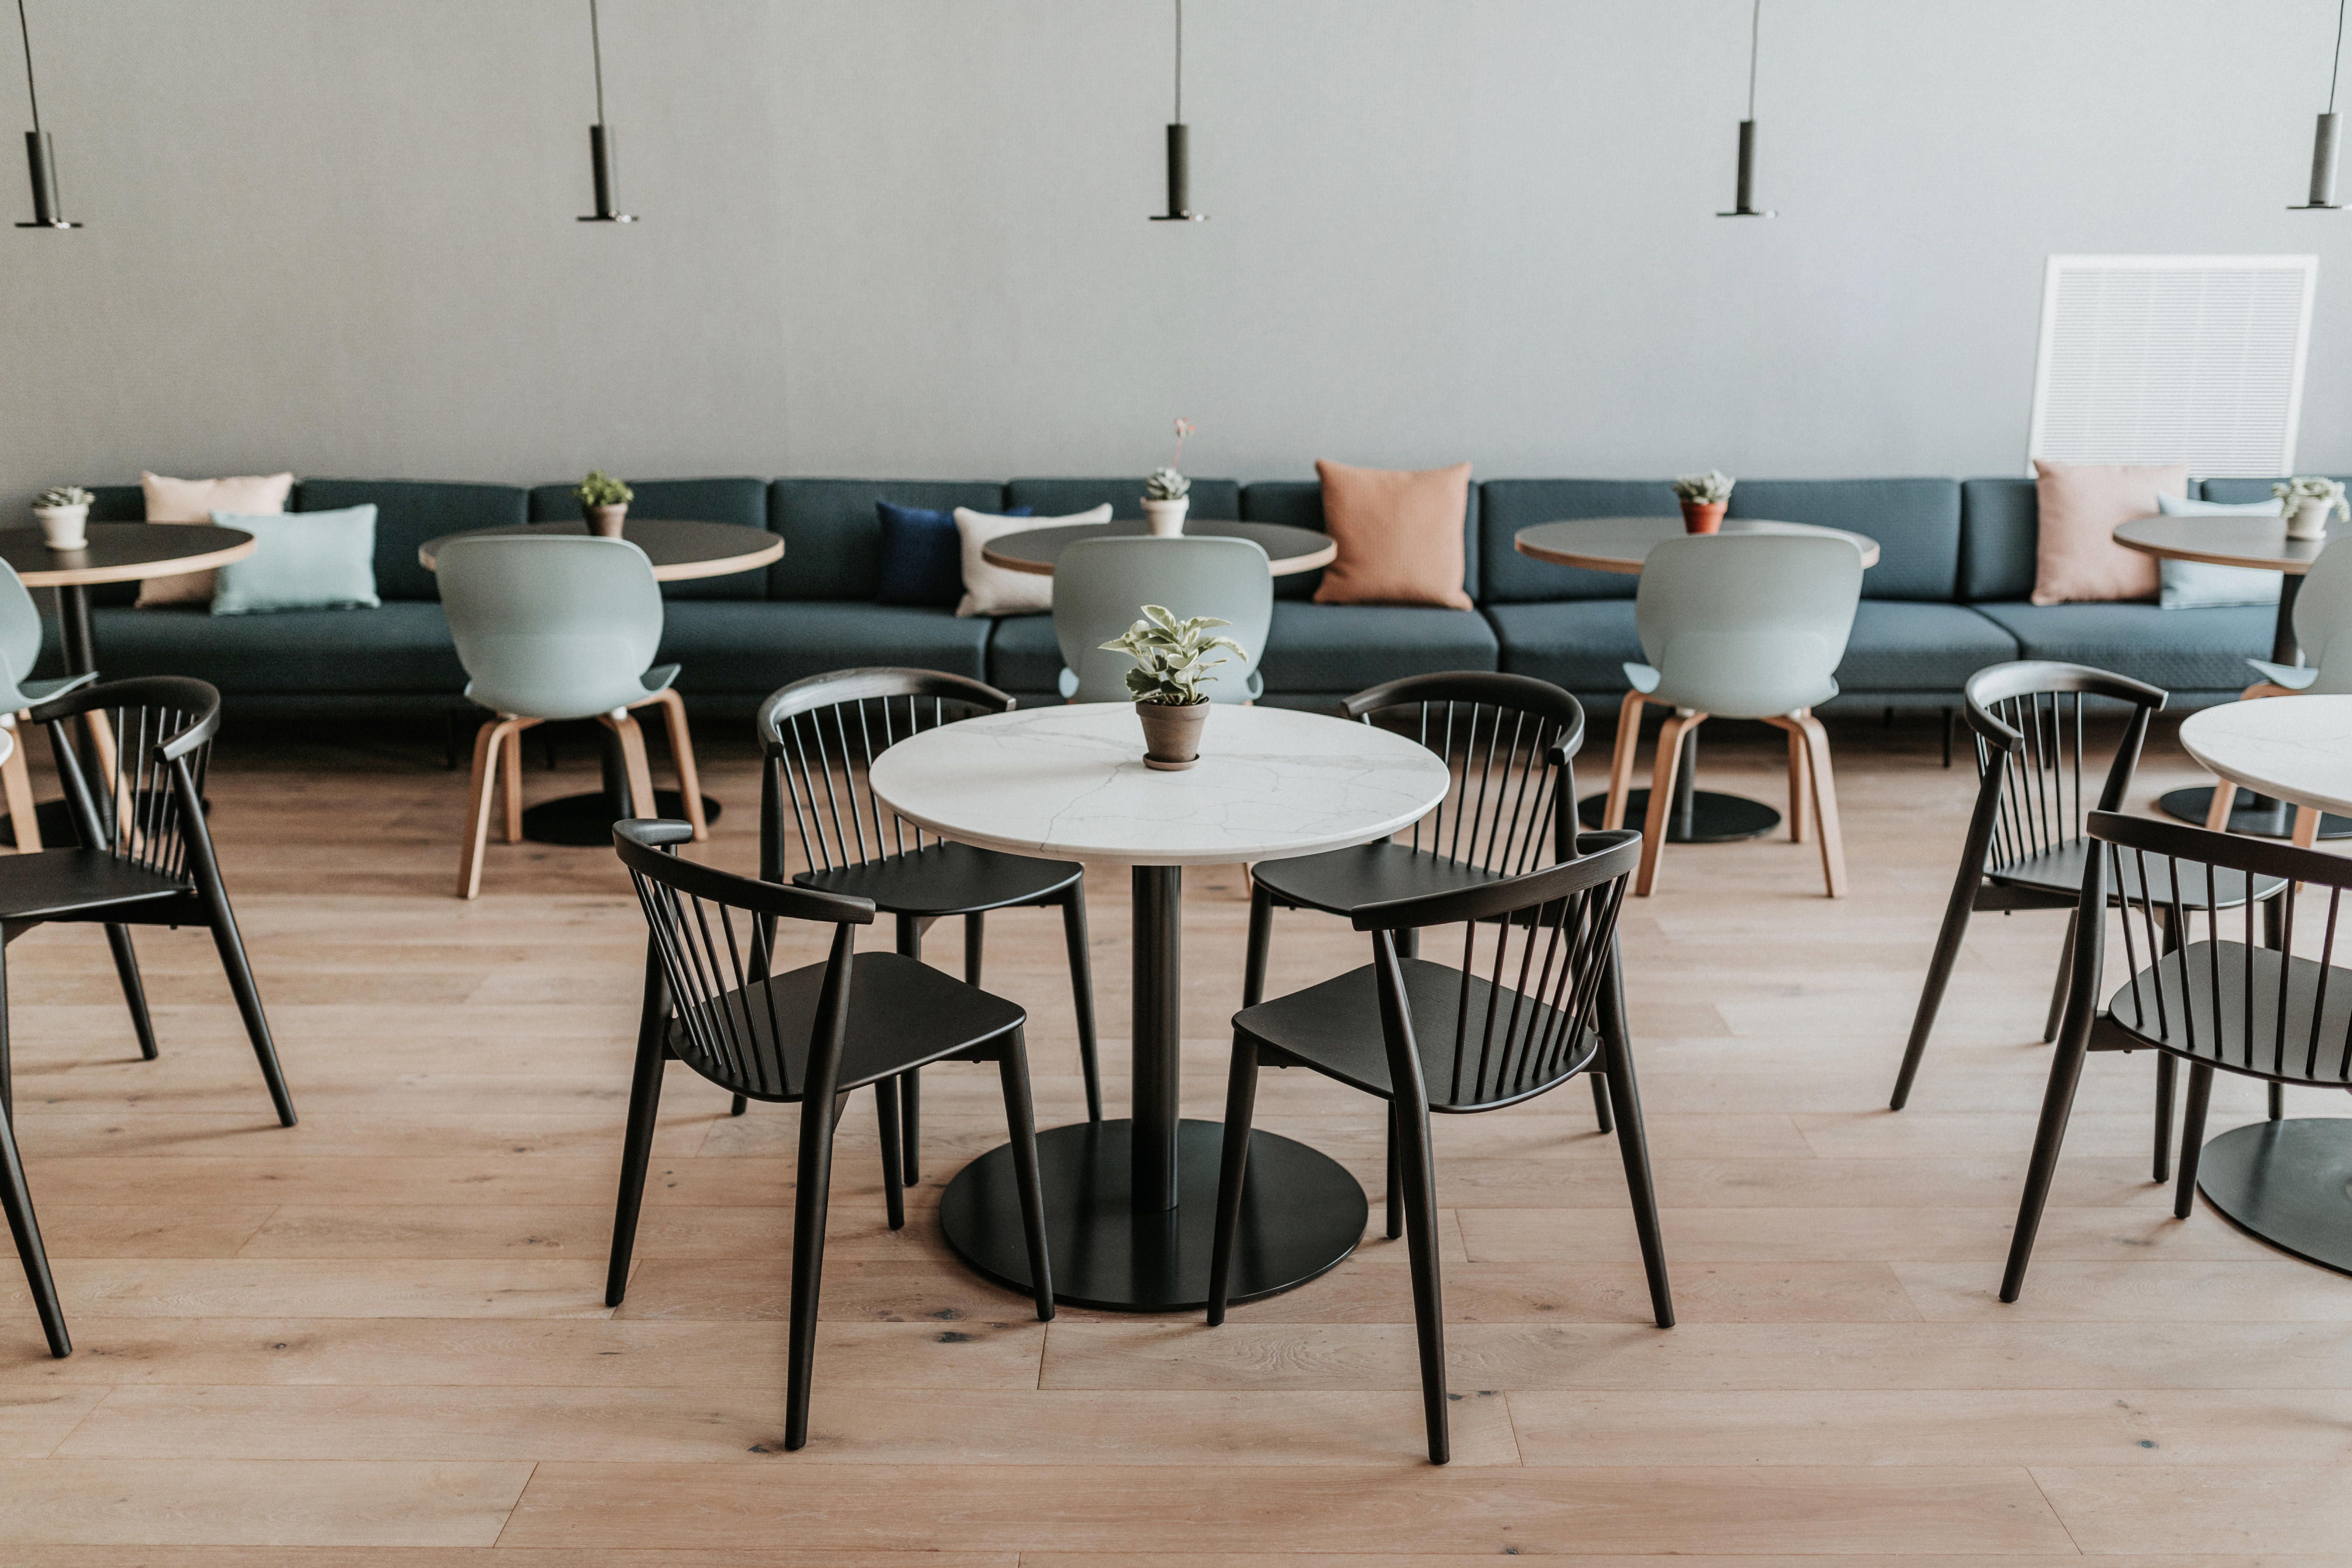 Haworth Hotel cafe and dining space featuring Newood and Maari side chairs, Lyda modular seating, Planes disc base tables, and Cielo pendant lighting.